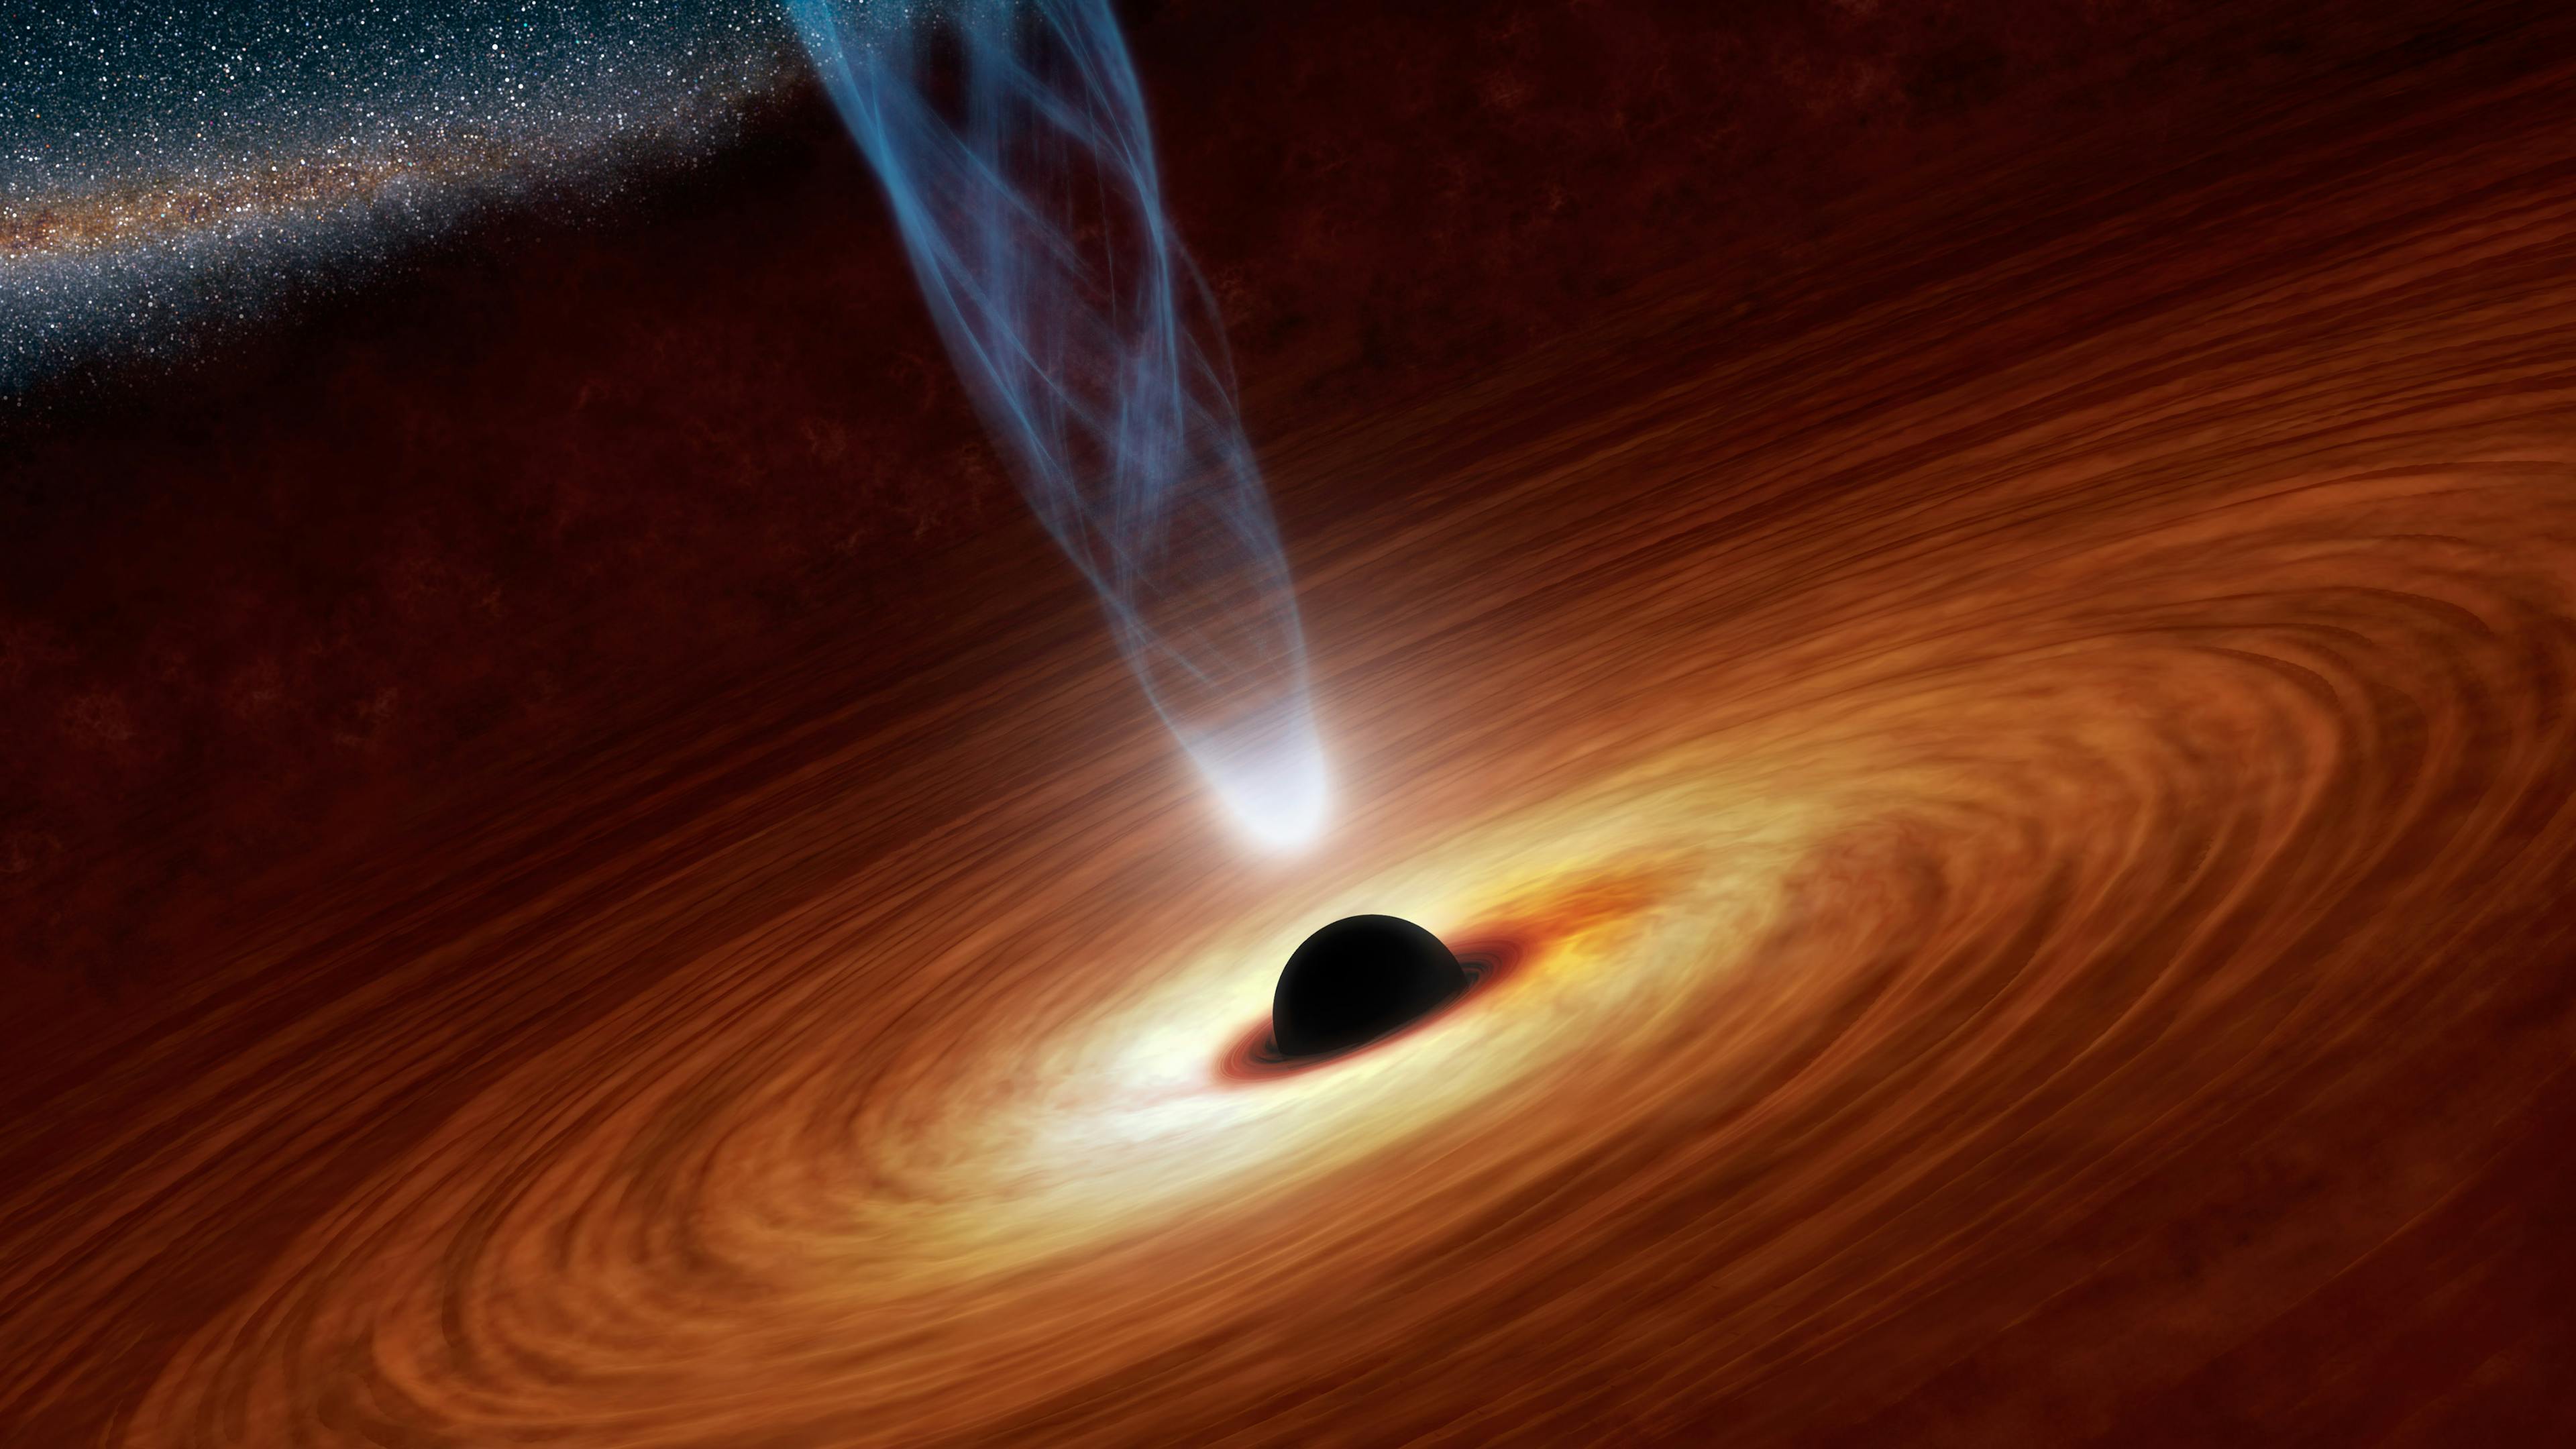 Black Holes and Impossible Planets